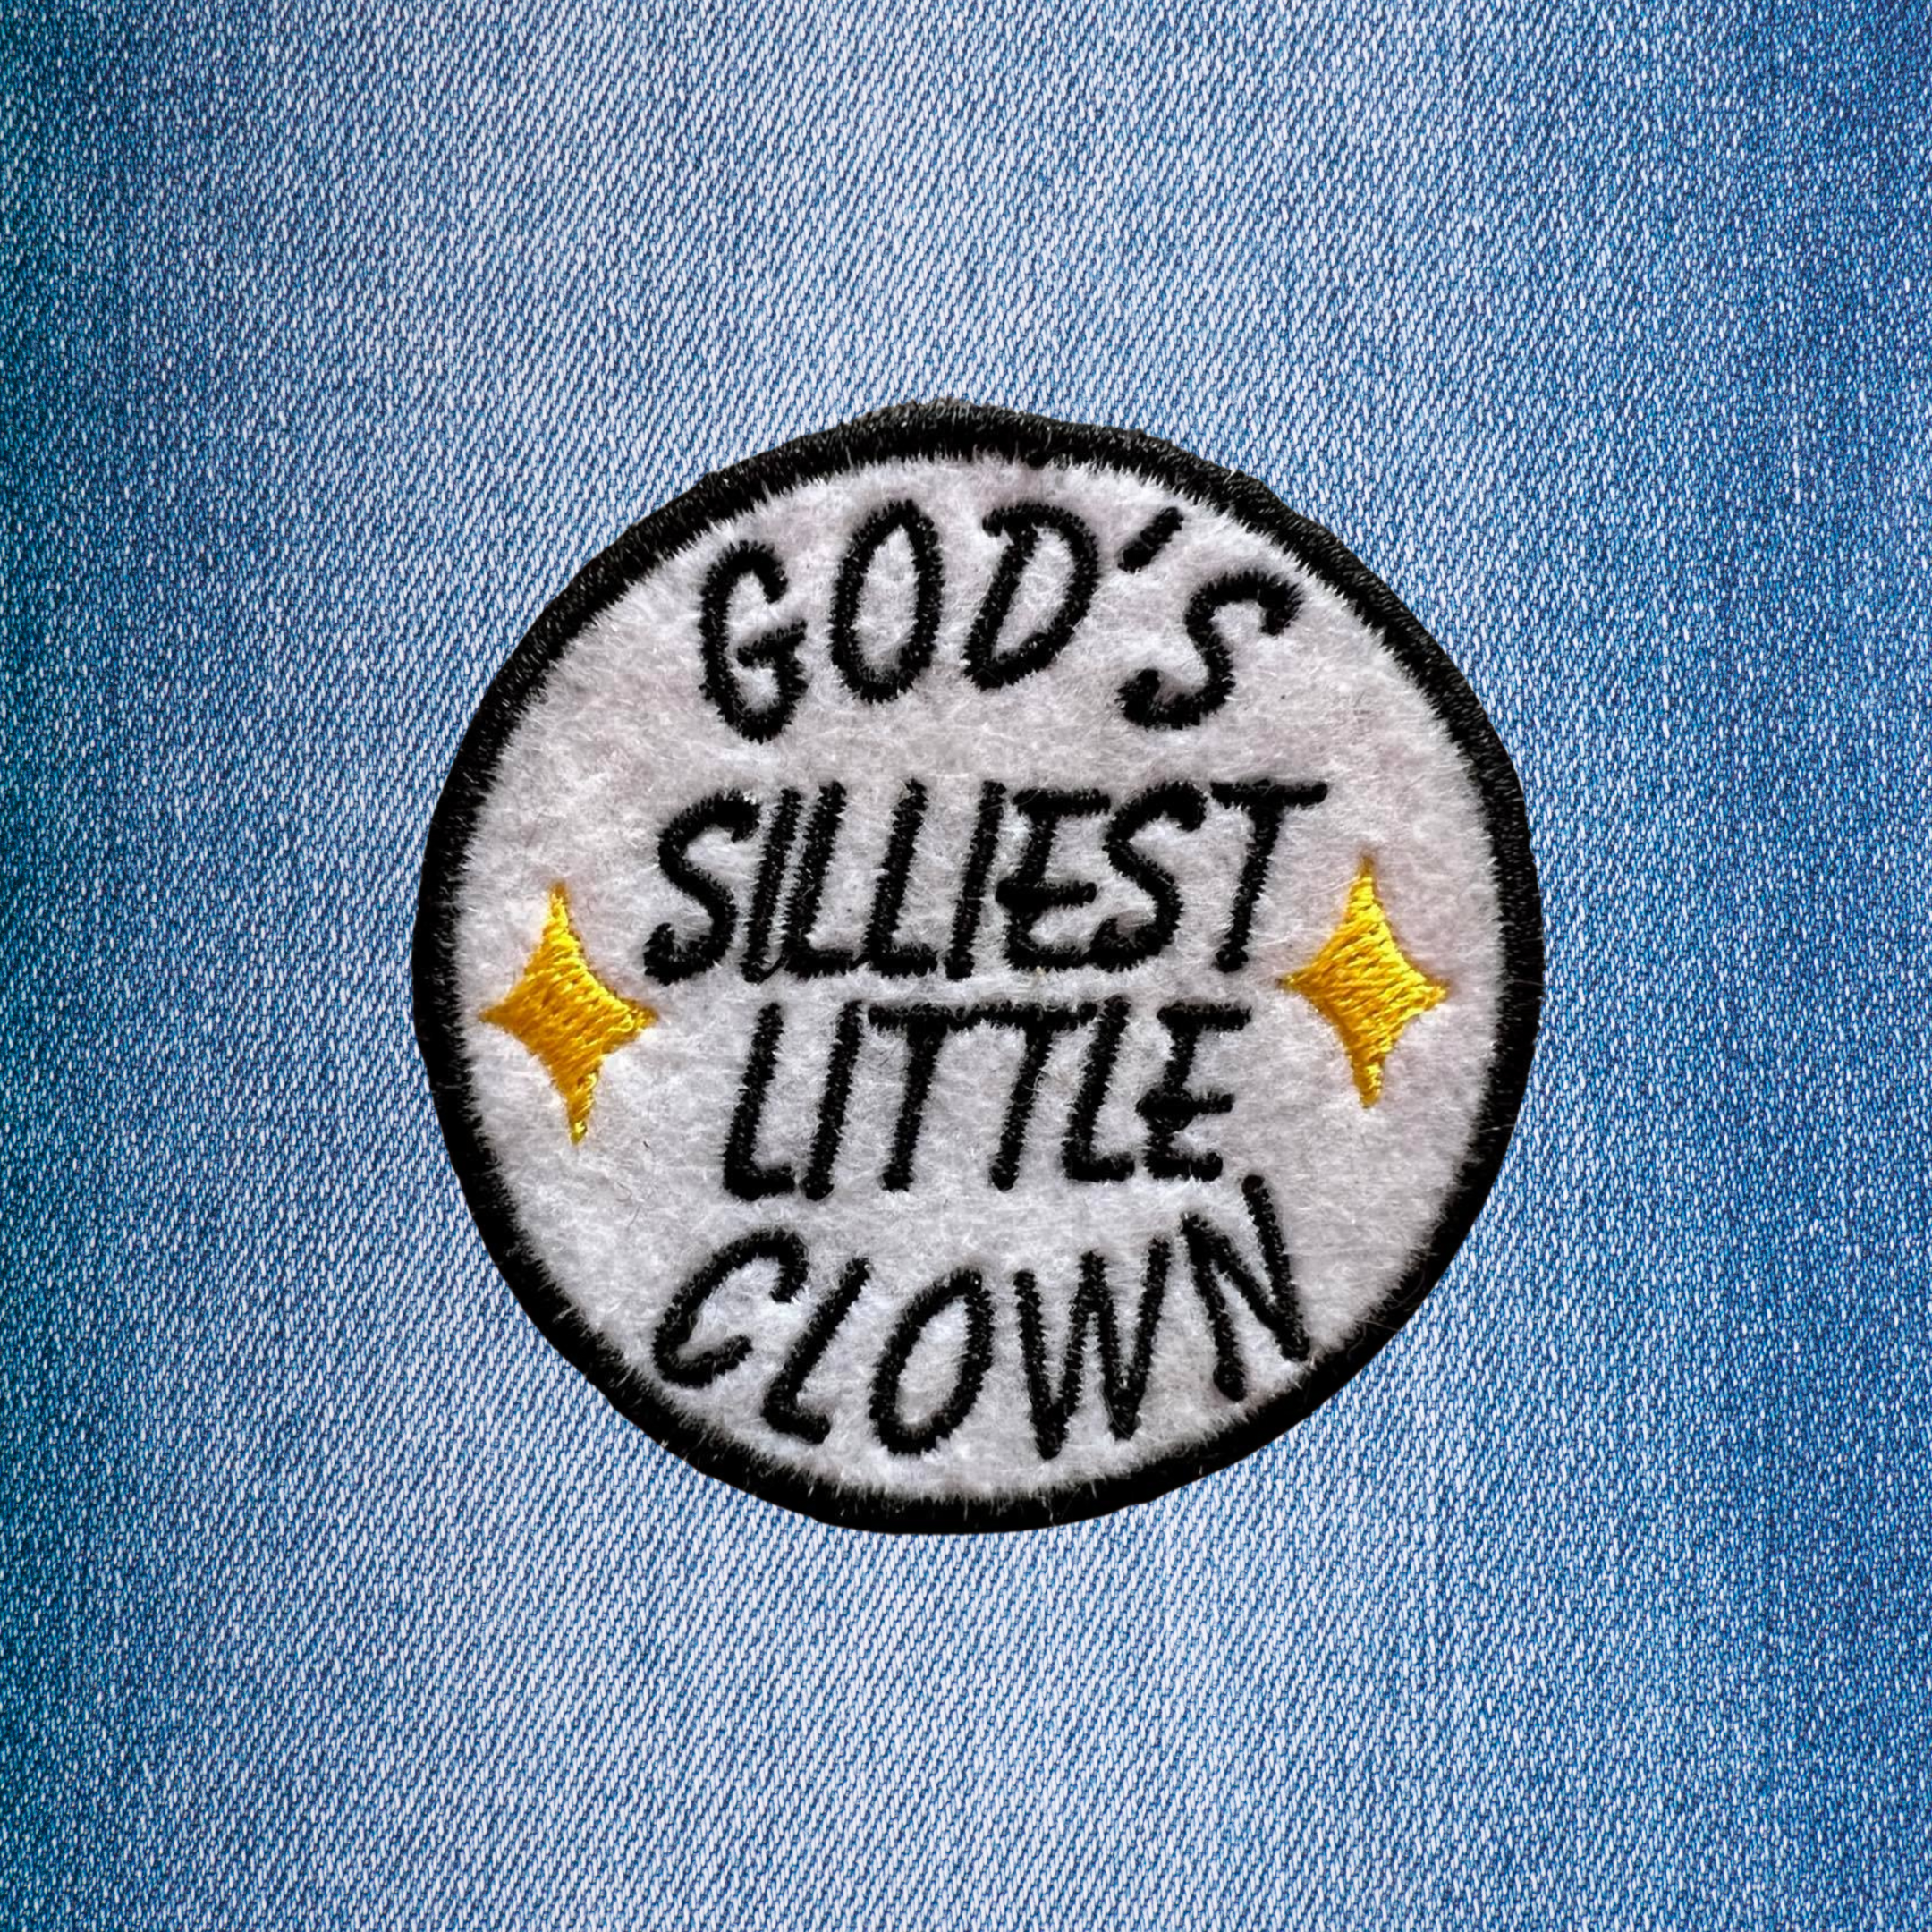 God's Silliest Little Clown Embroidered Iron-on Patch